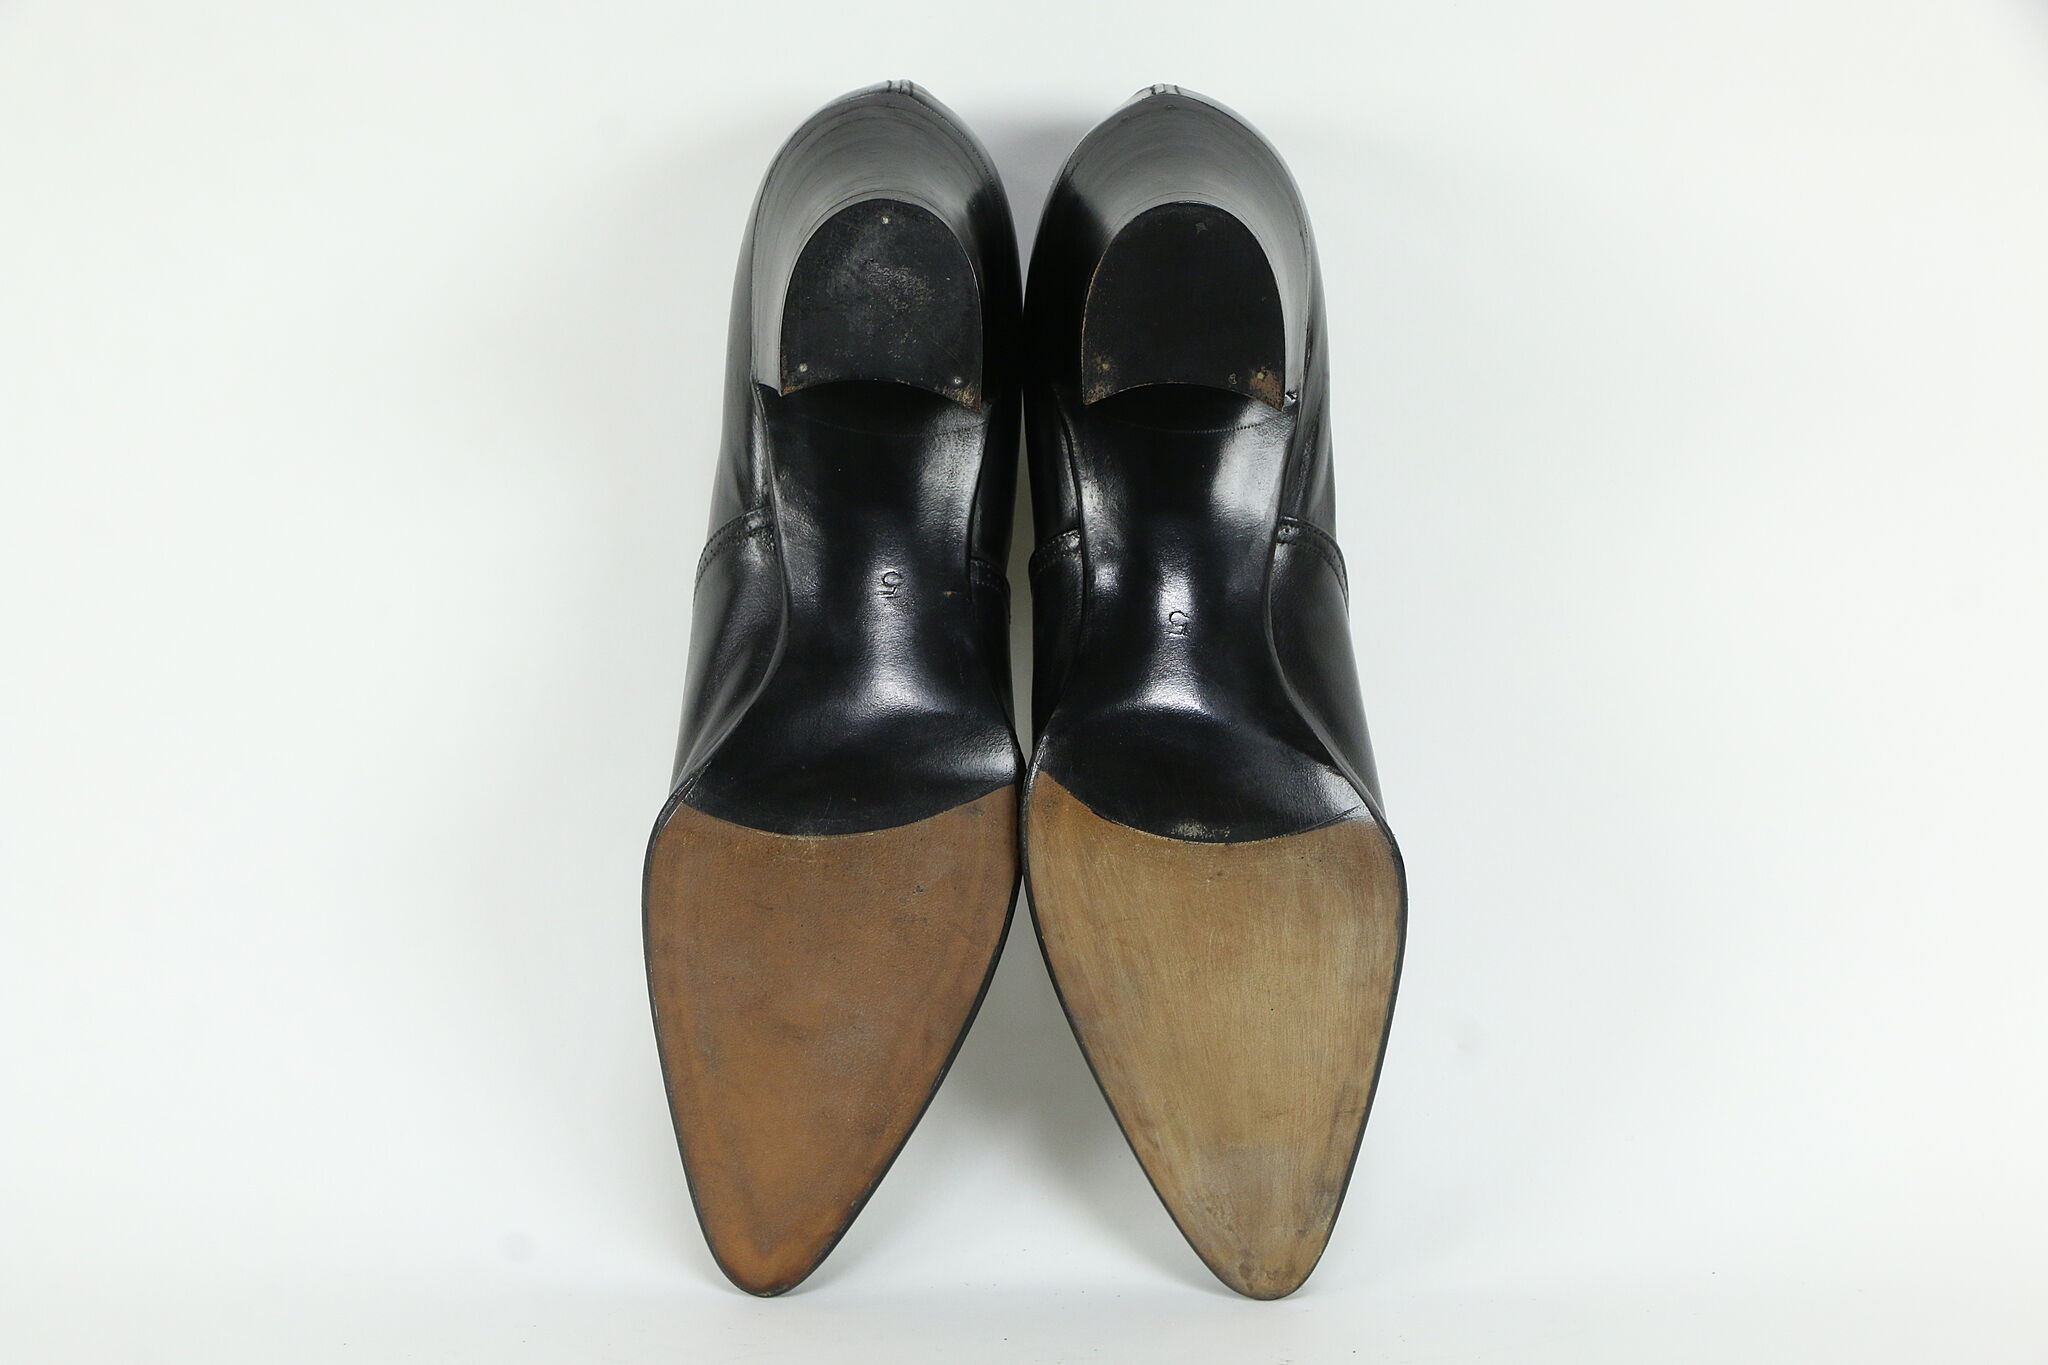 Pair of Ladies Antique 1920 Never Worn Shoes, Size 5